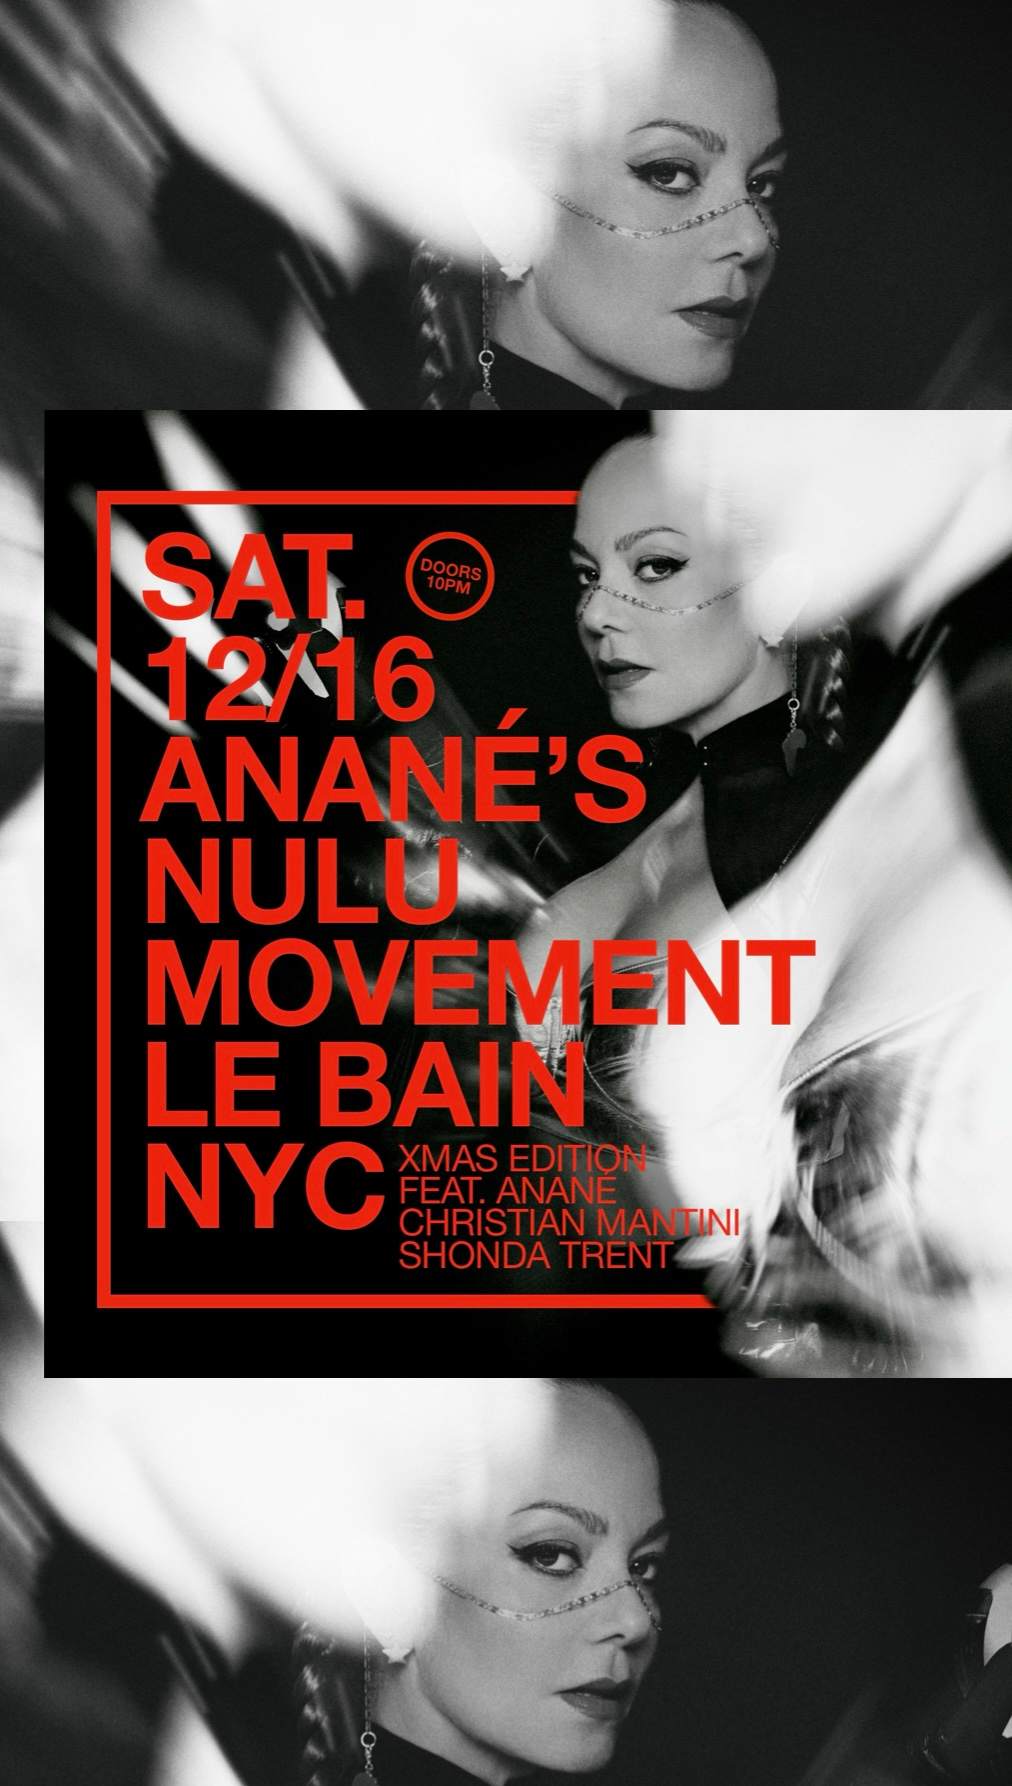 Anané's Nulu Movement Xmas Edition - フライヤー表